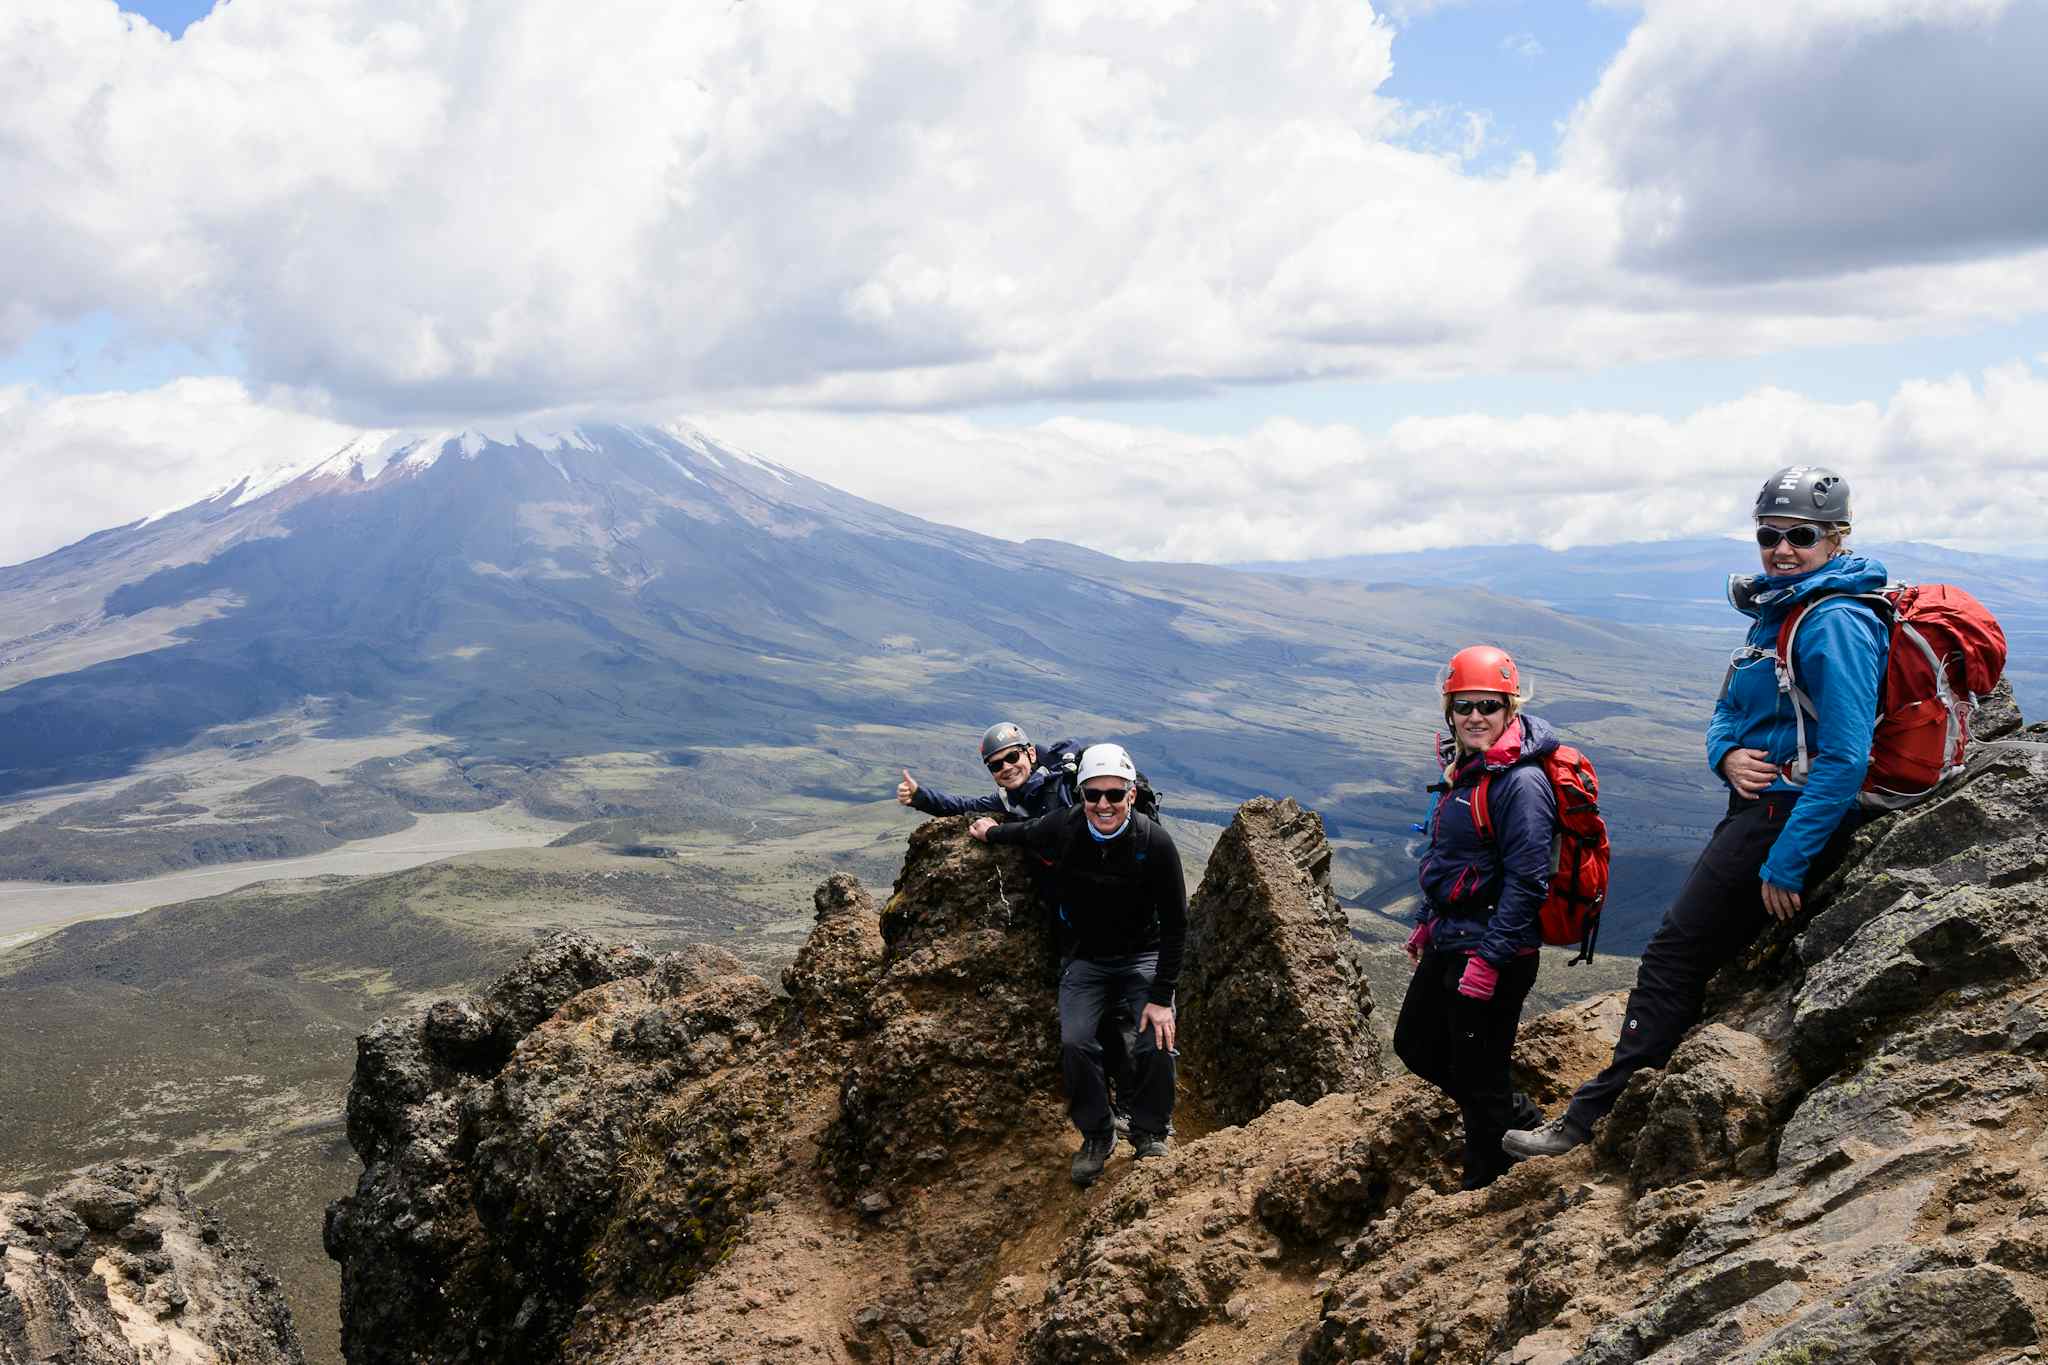 On the summit of Rumiñahui Volcano (4,600m). Photo: Andean Face.